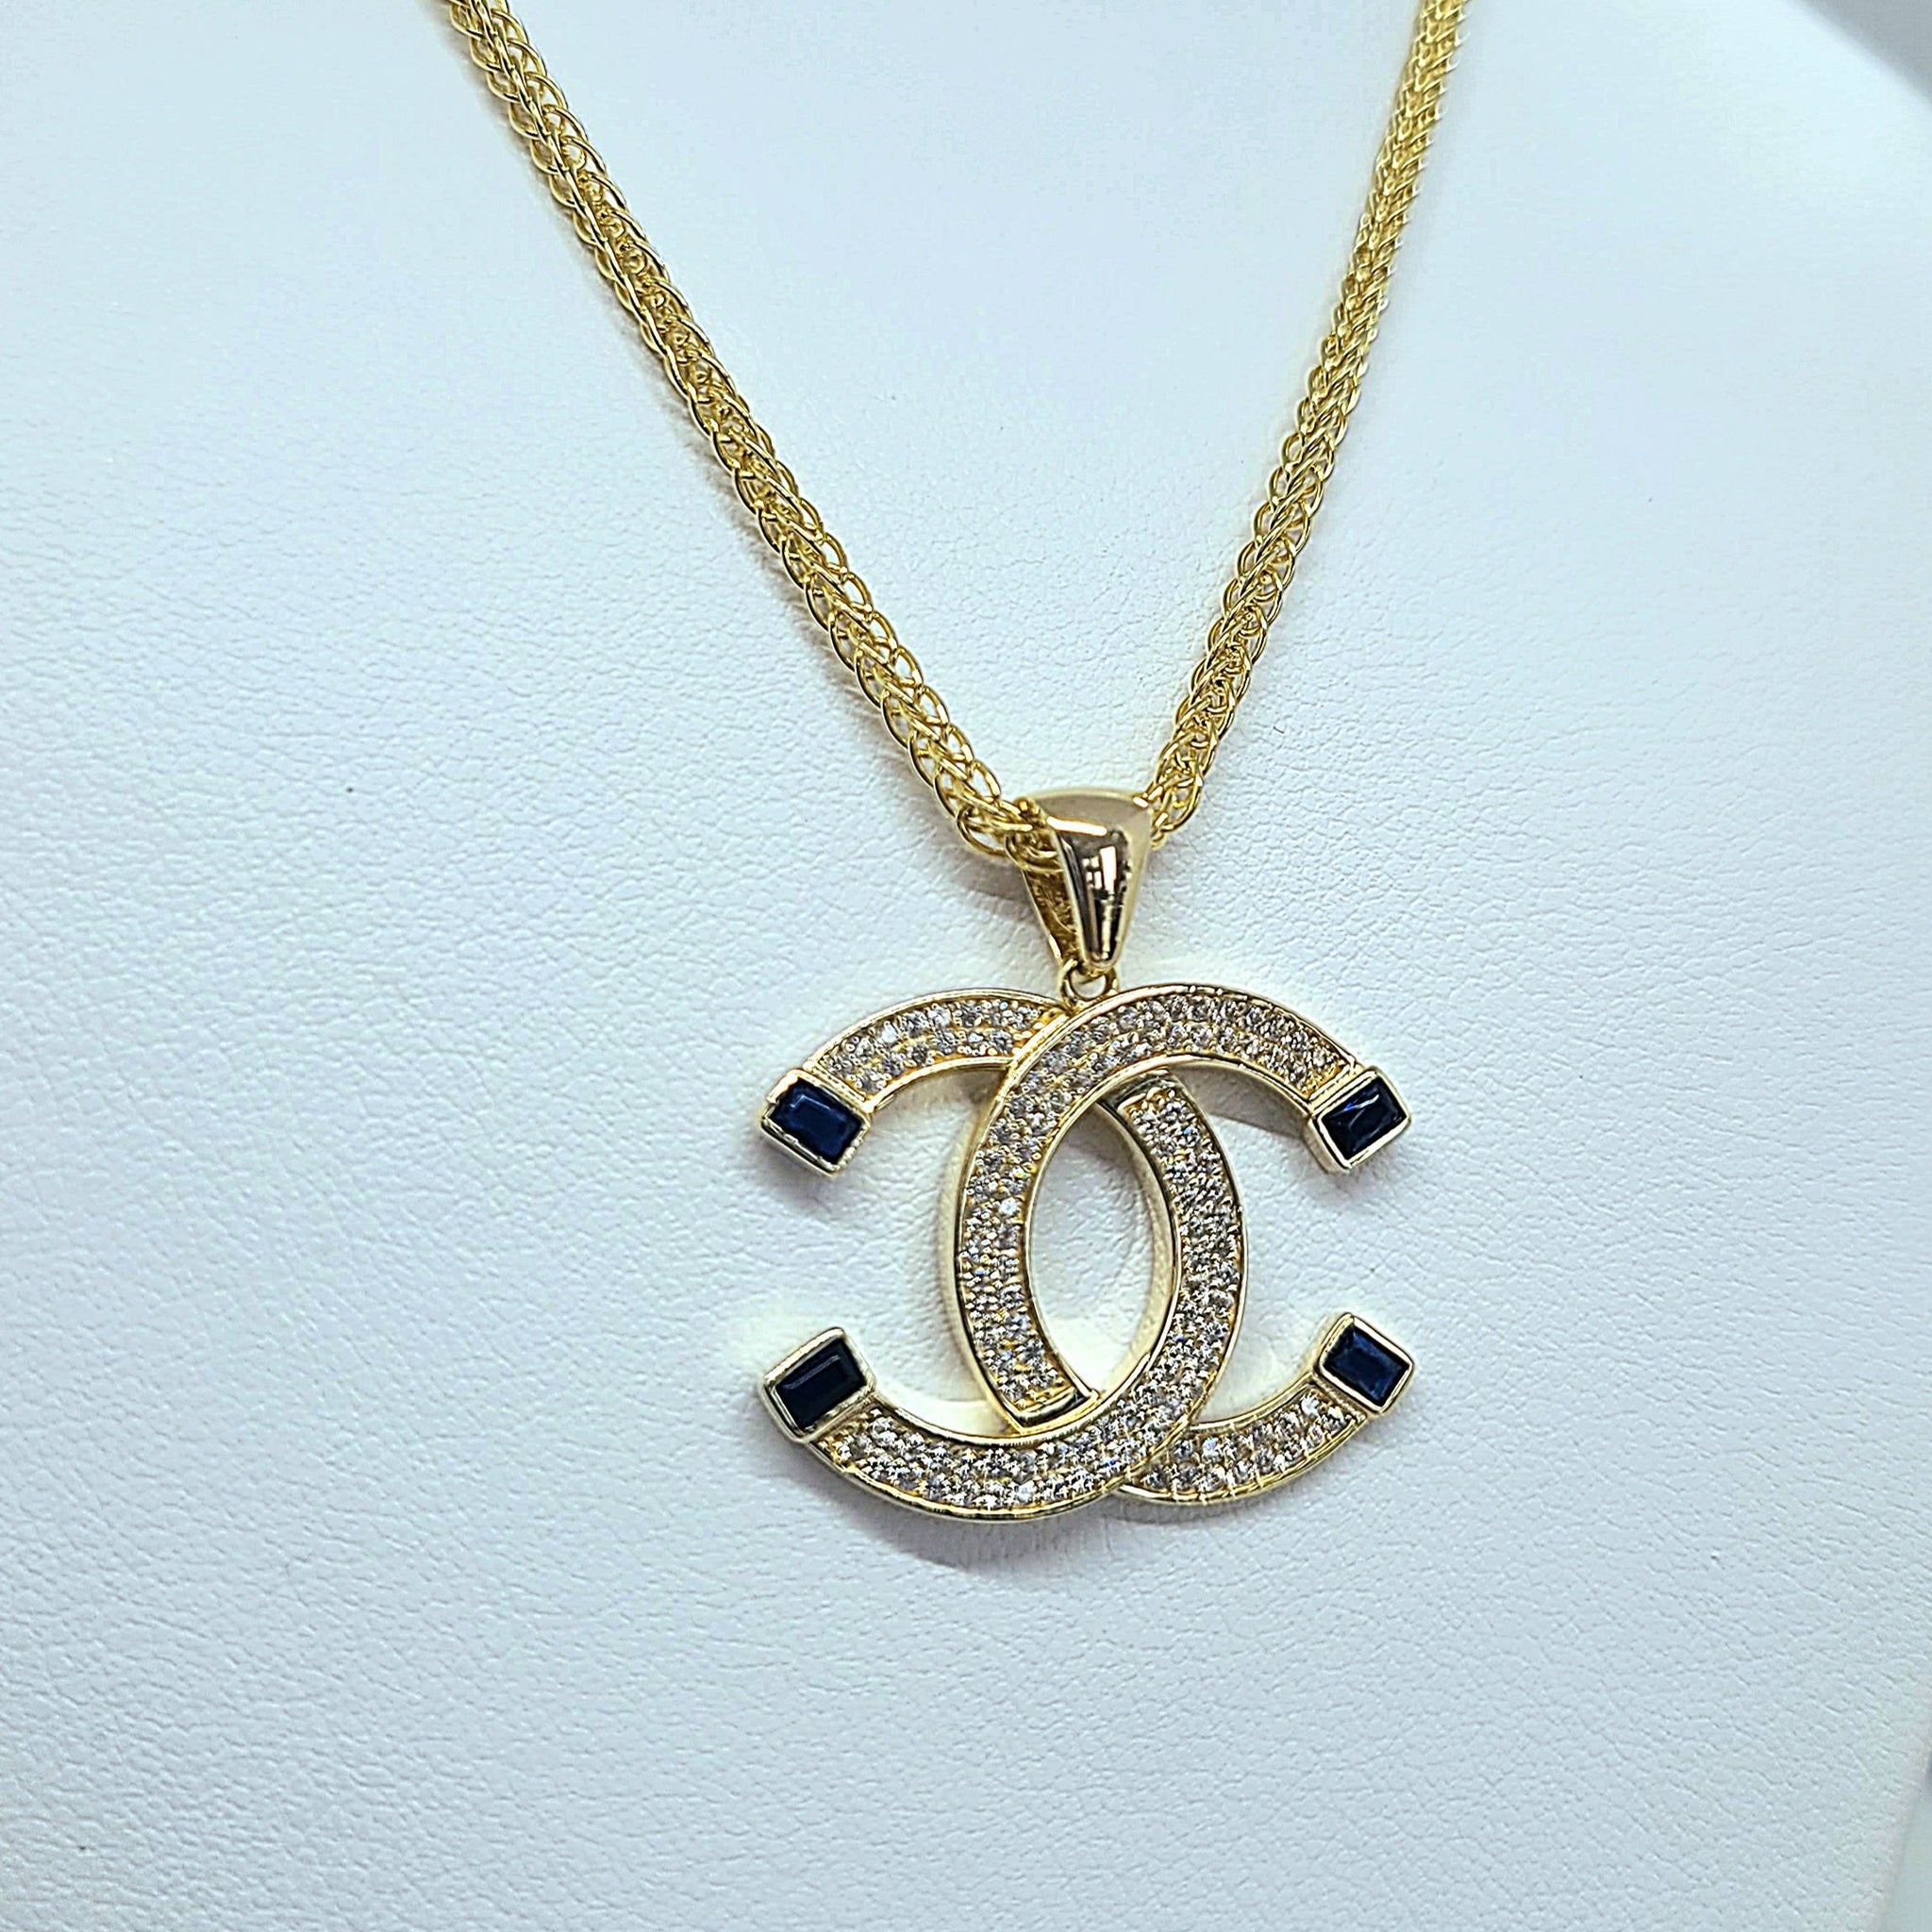 10kt. Yellow Gold Chanel Necklace - Tello Jewellers